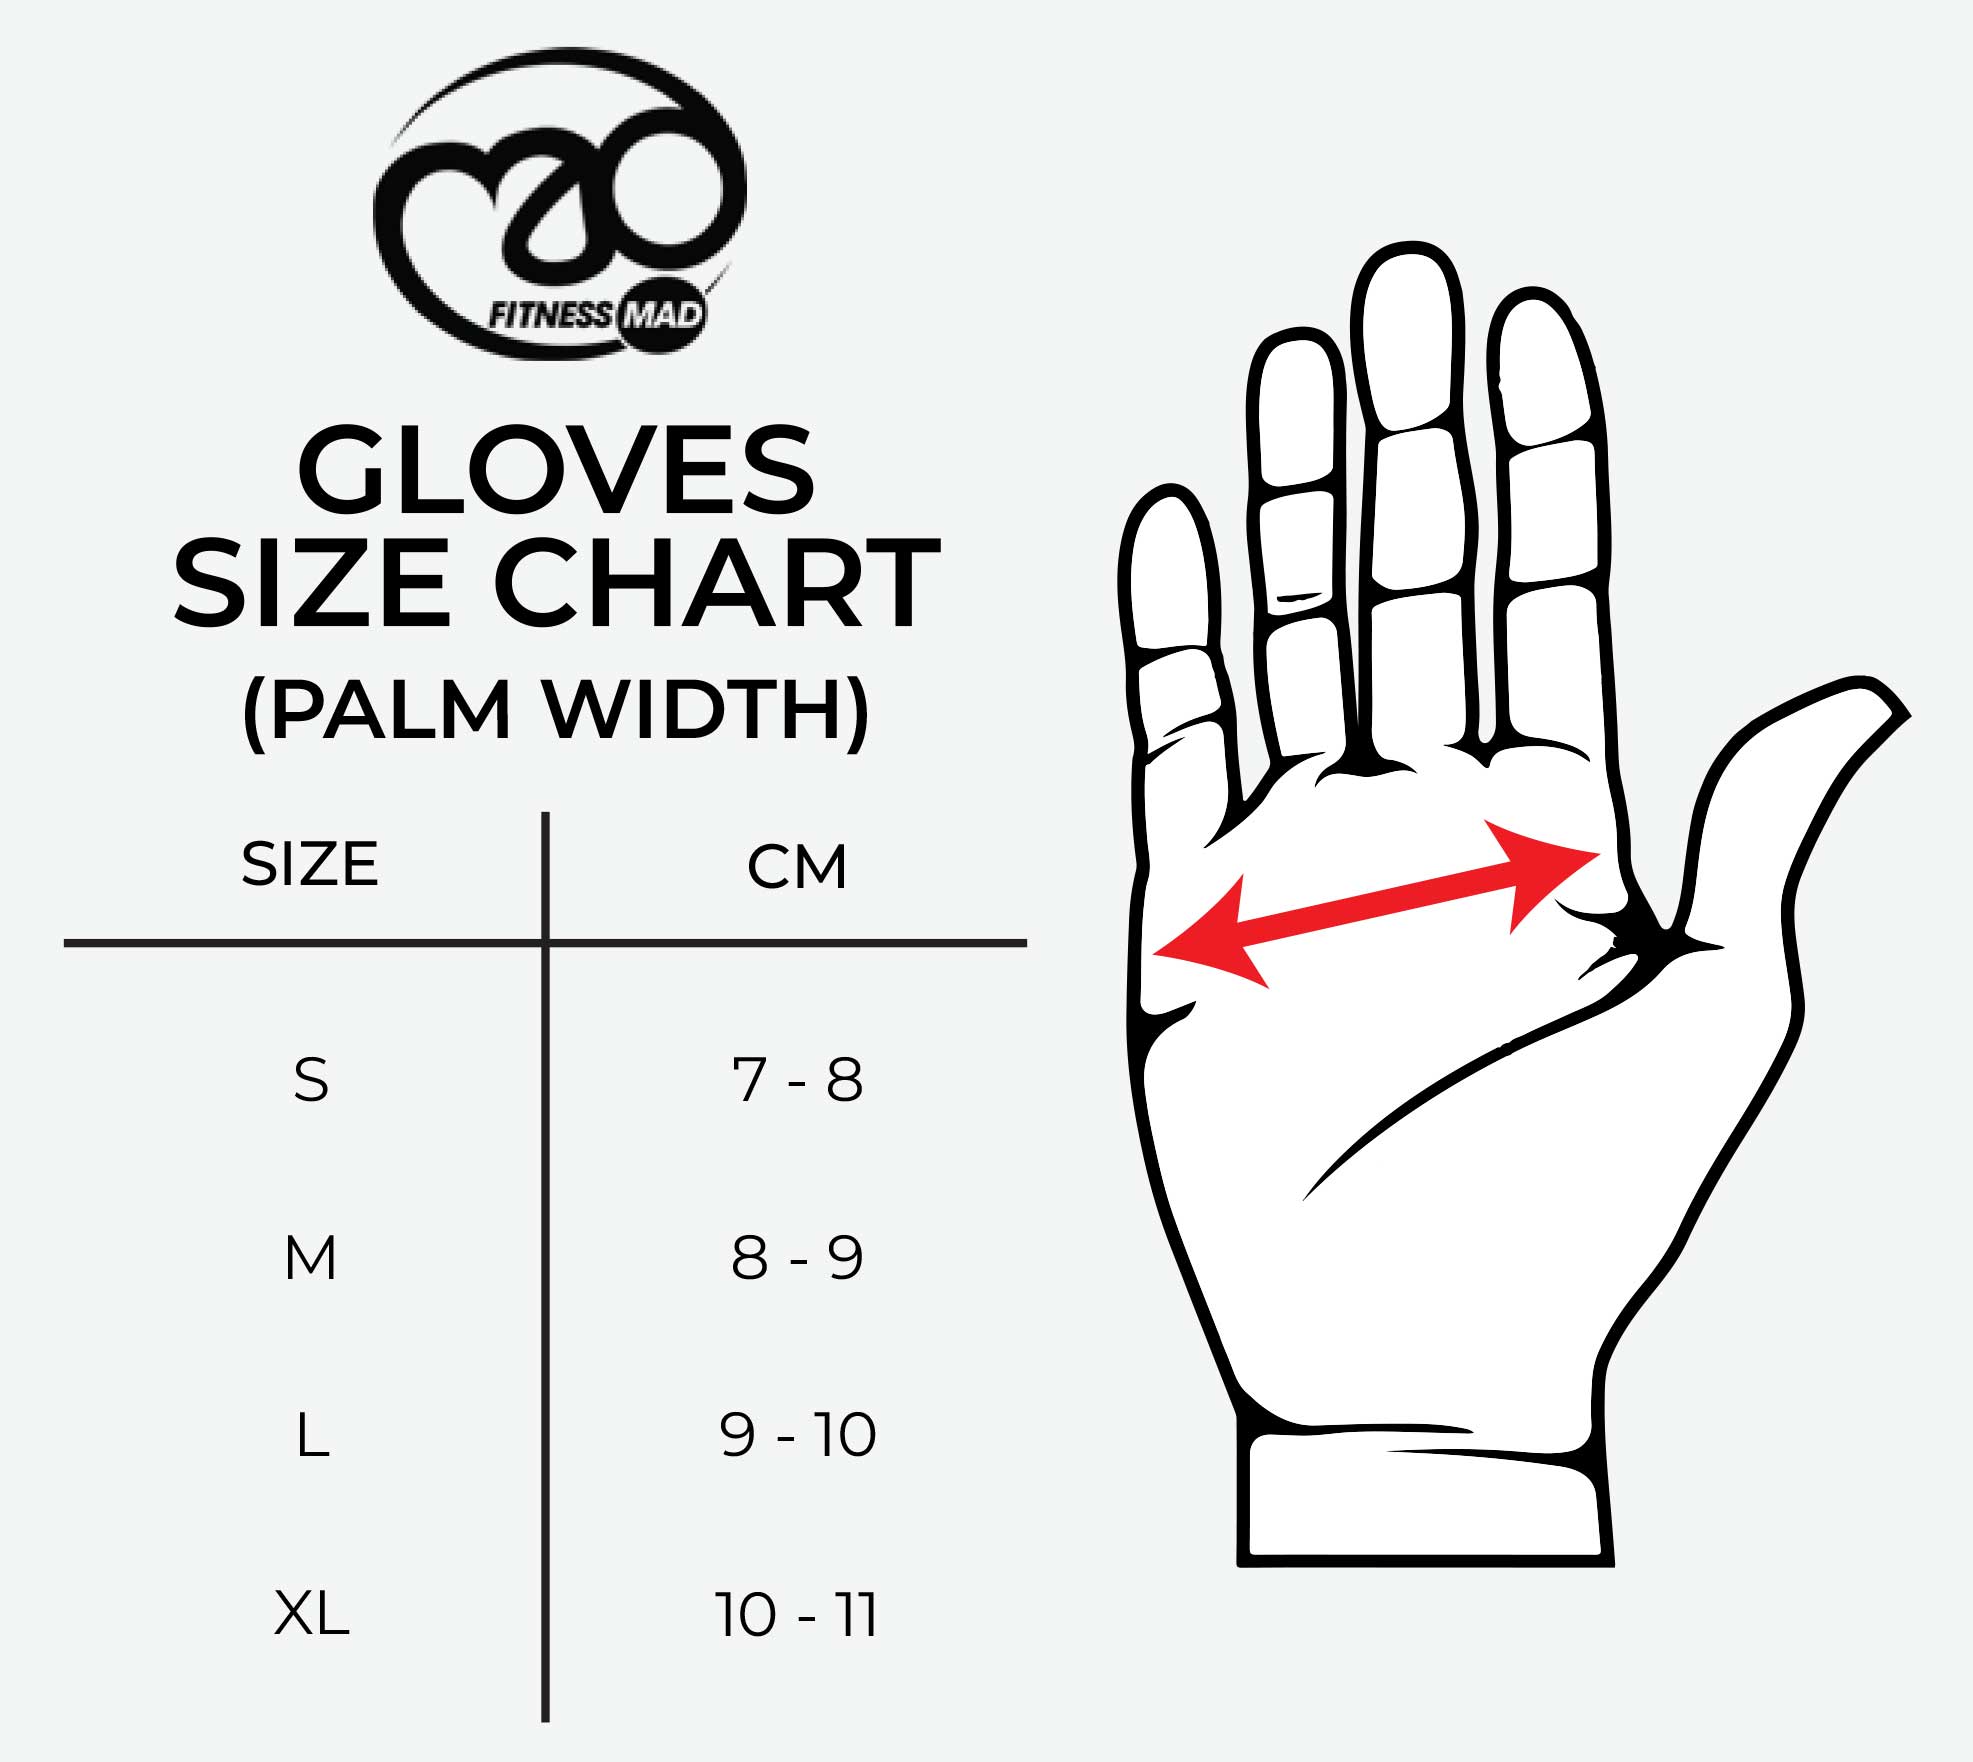 Fitness-Mad gloves size chart